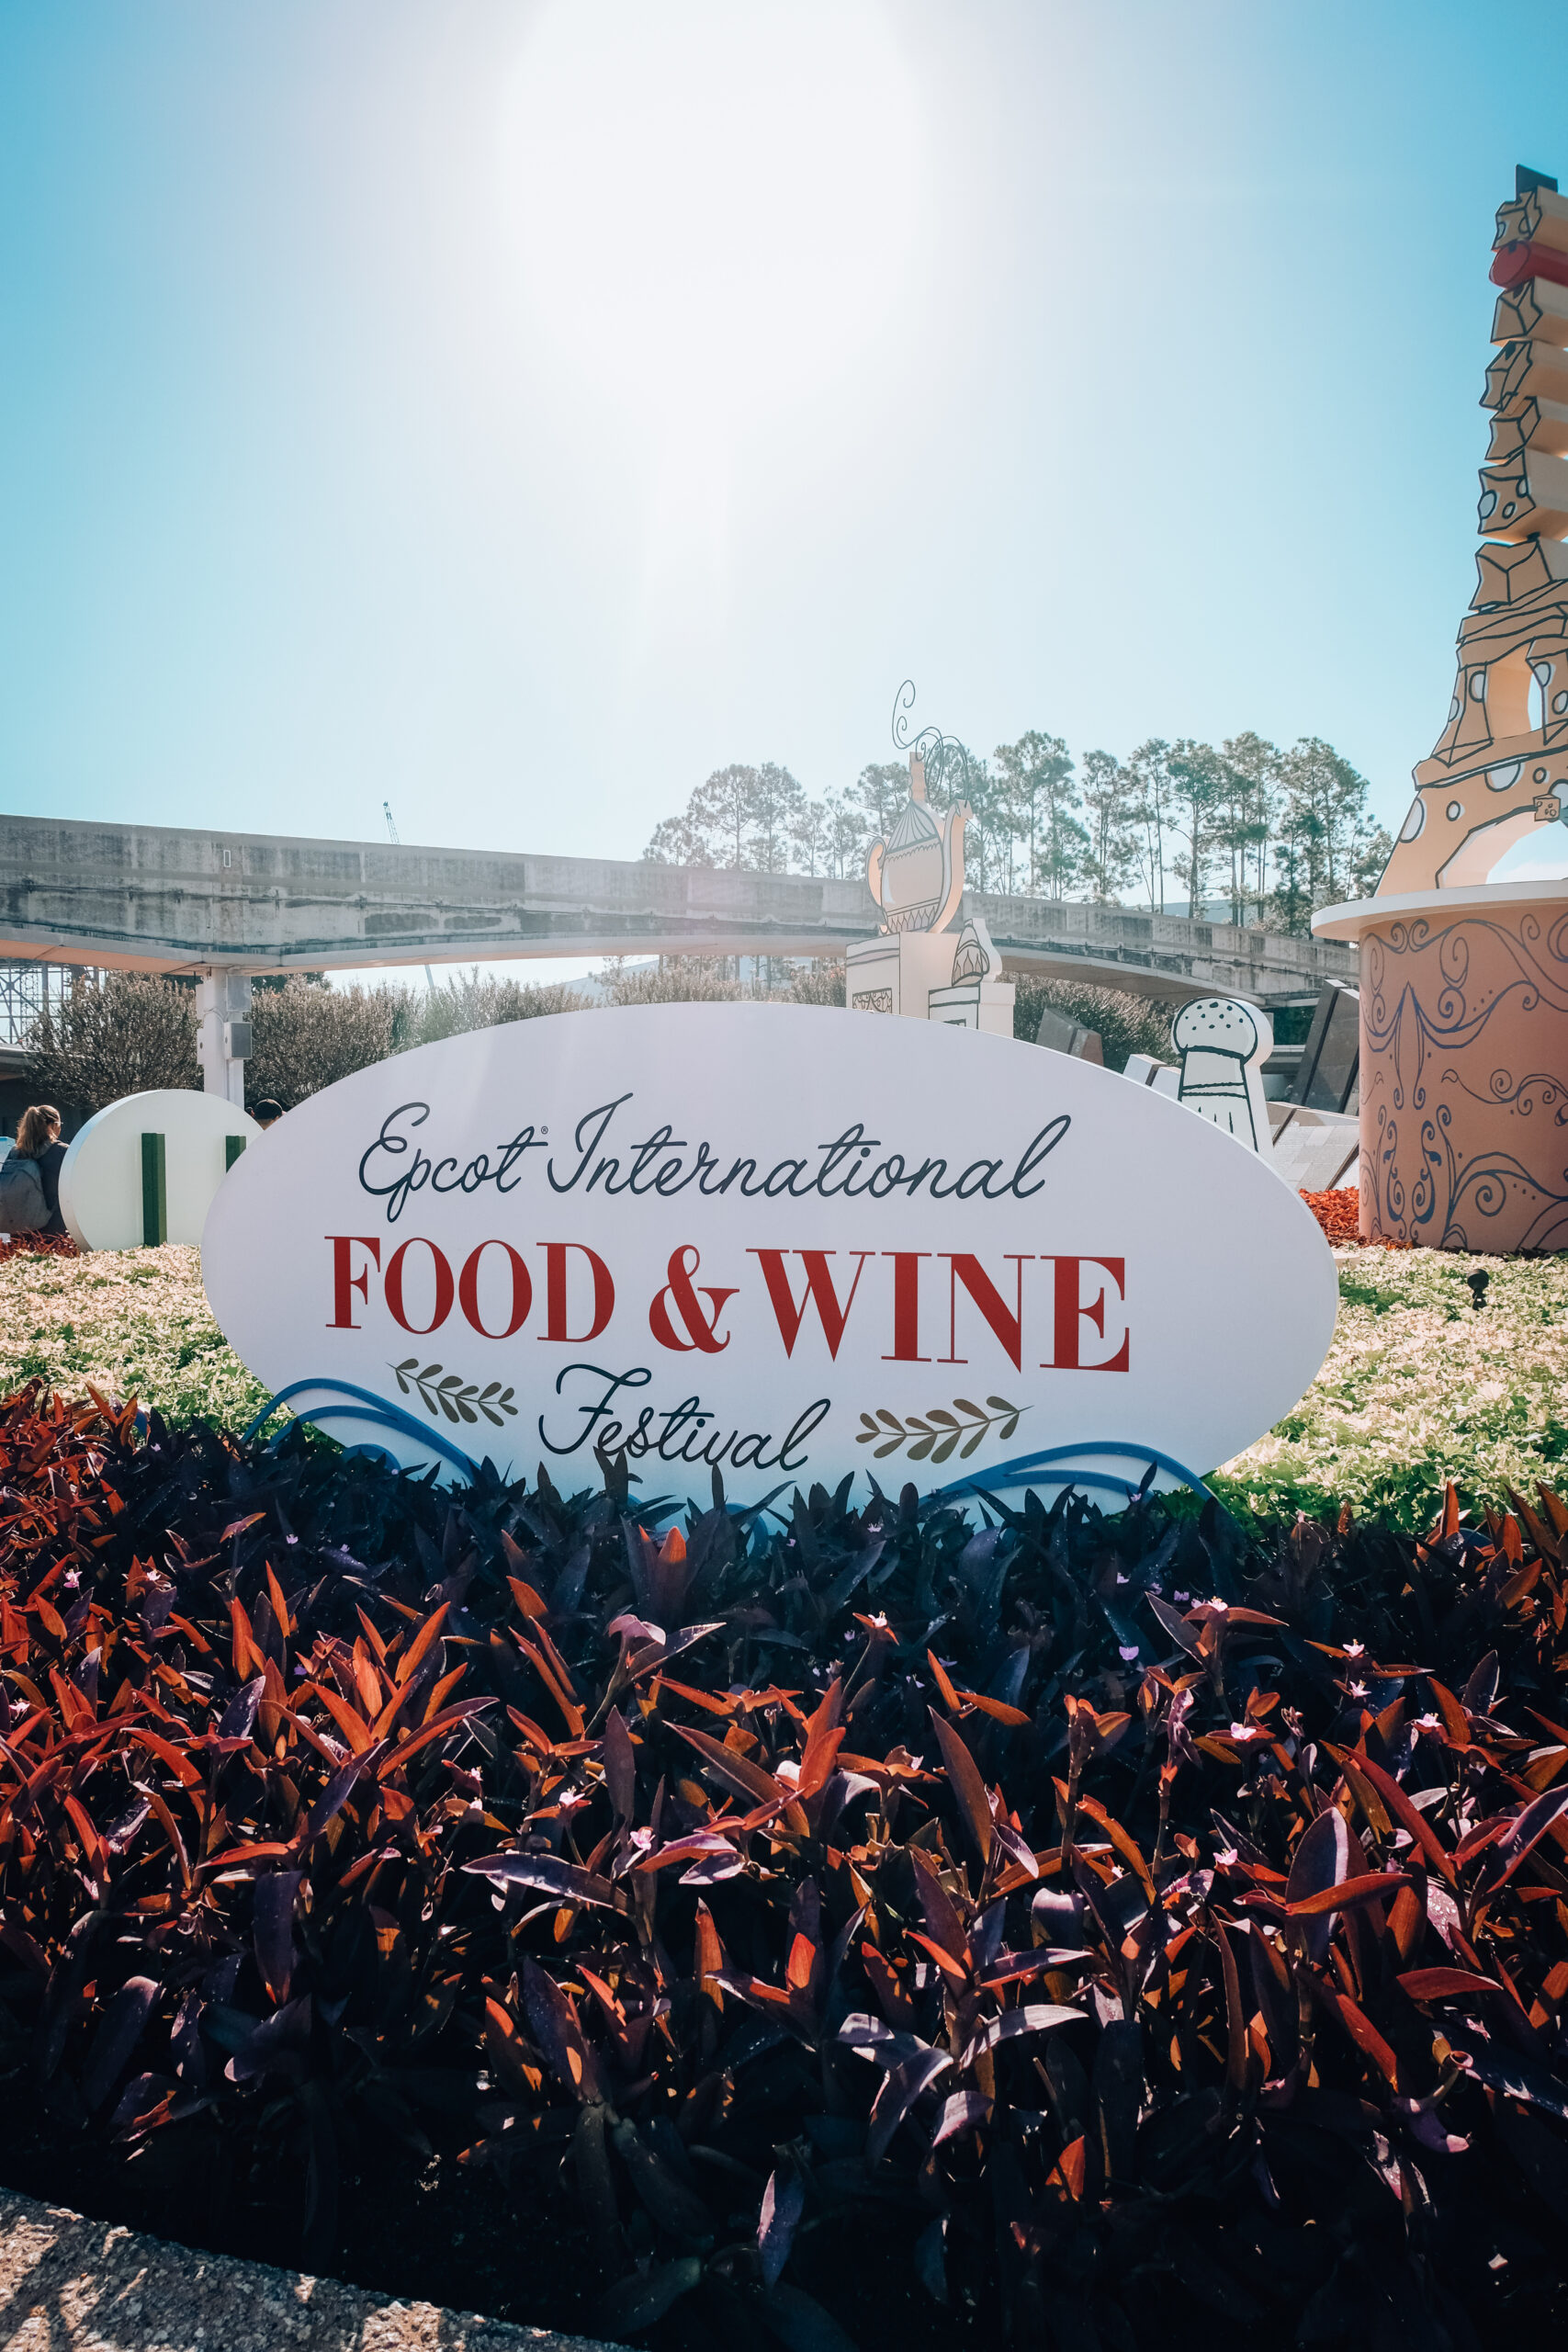 The sign at the Epcot food and wine festival, Orlando